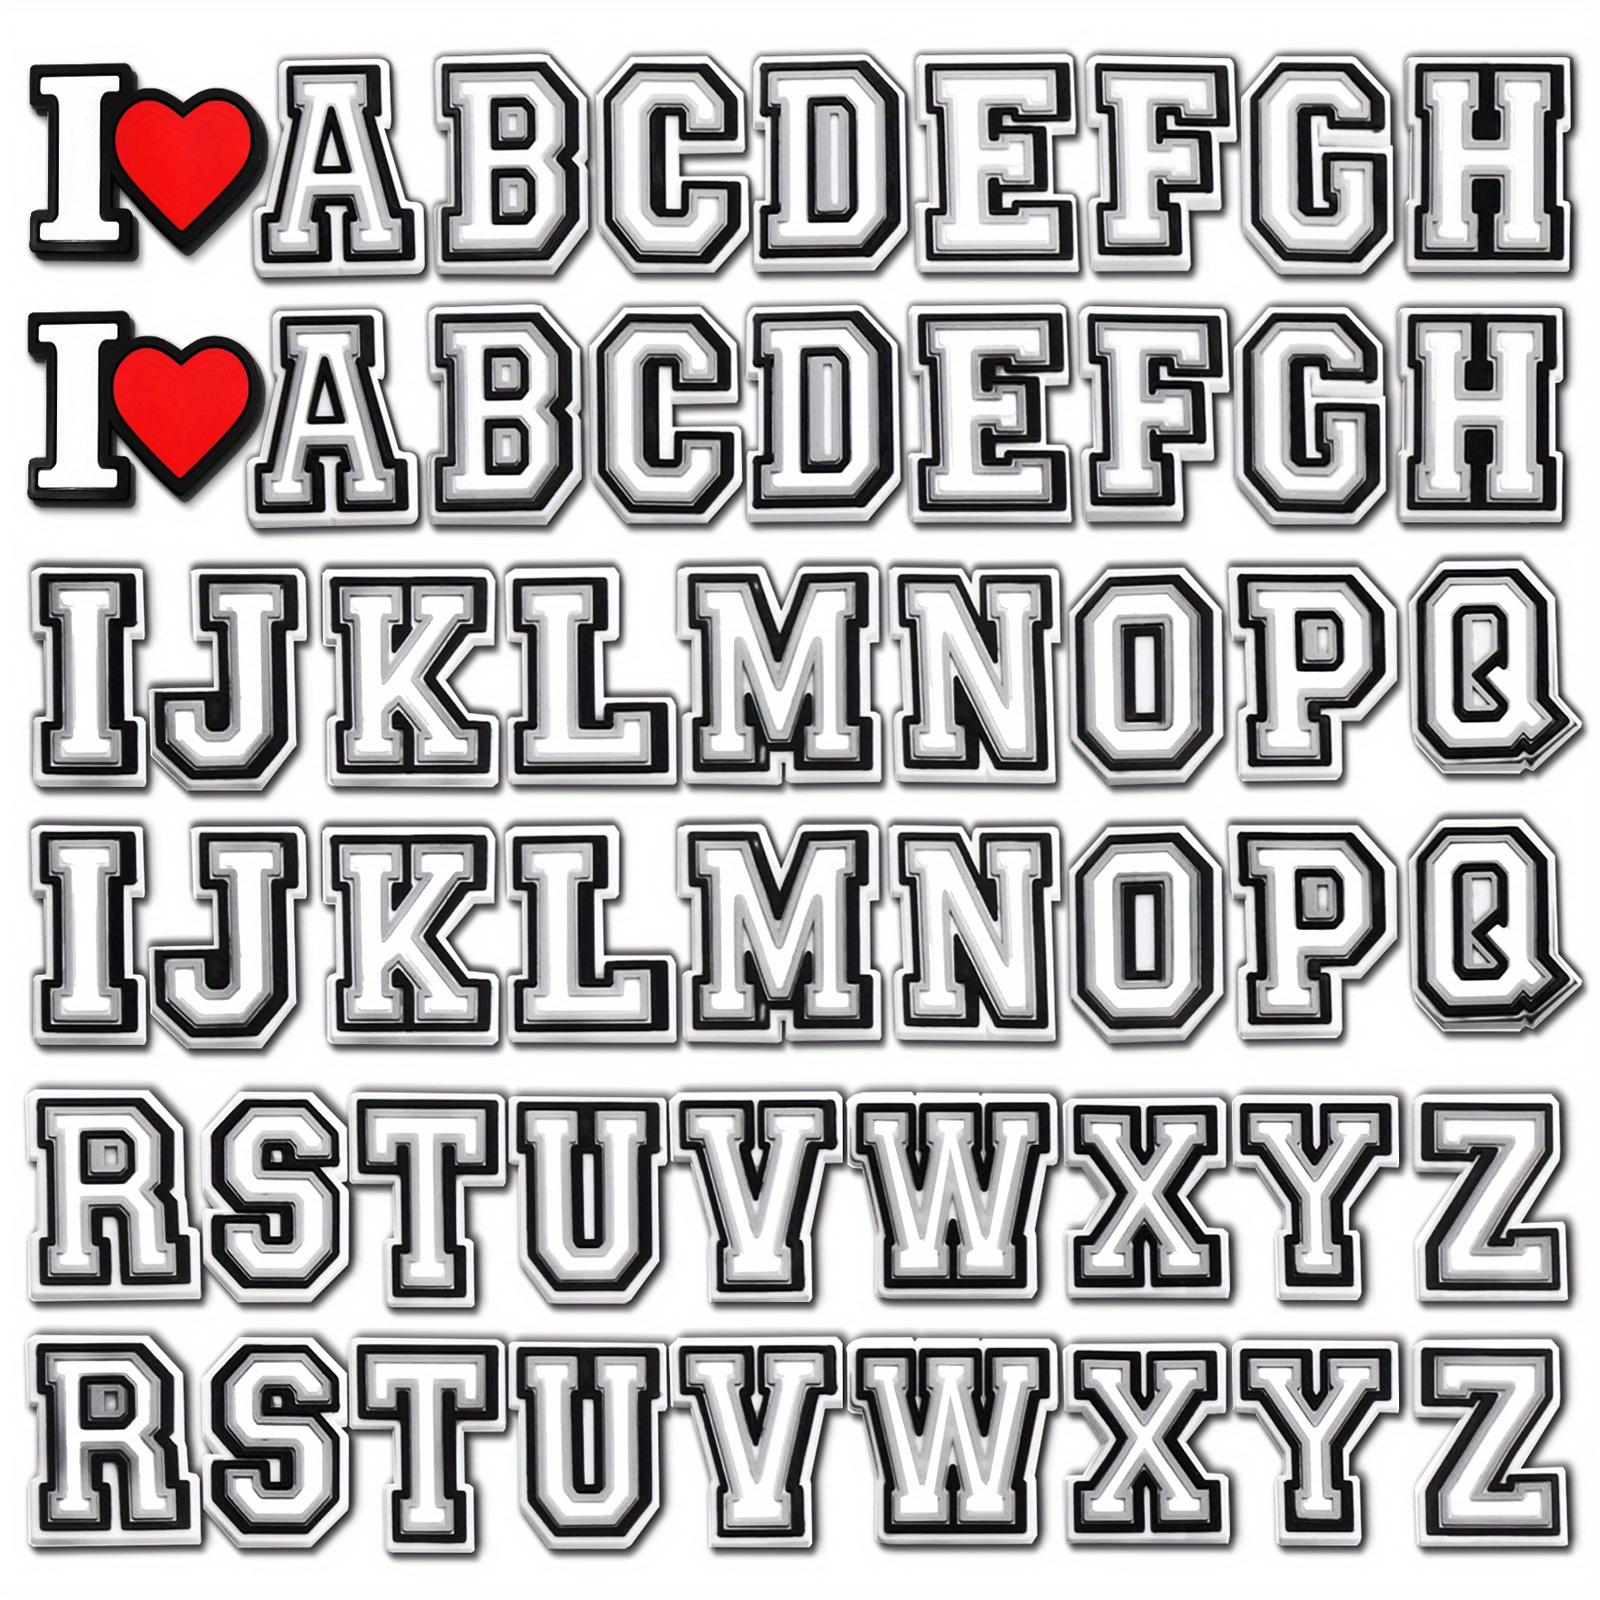 56PCS Double Letter Shoe Charms for Crocs, Alphabet Gibits Charms with 'I  Heart' and Hashtag Symbols for Sandals Decorations, Letter Croc Charms Pack